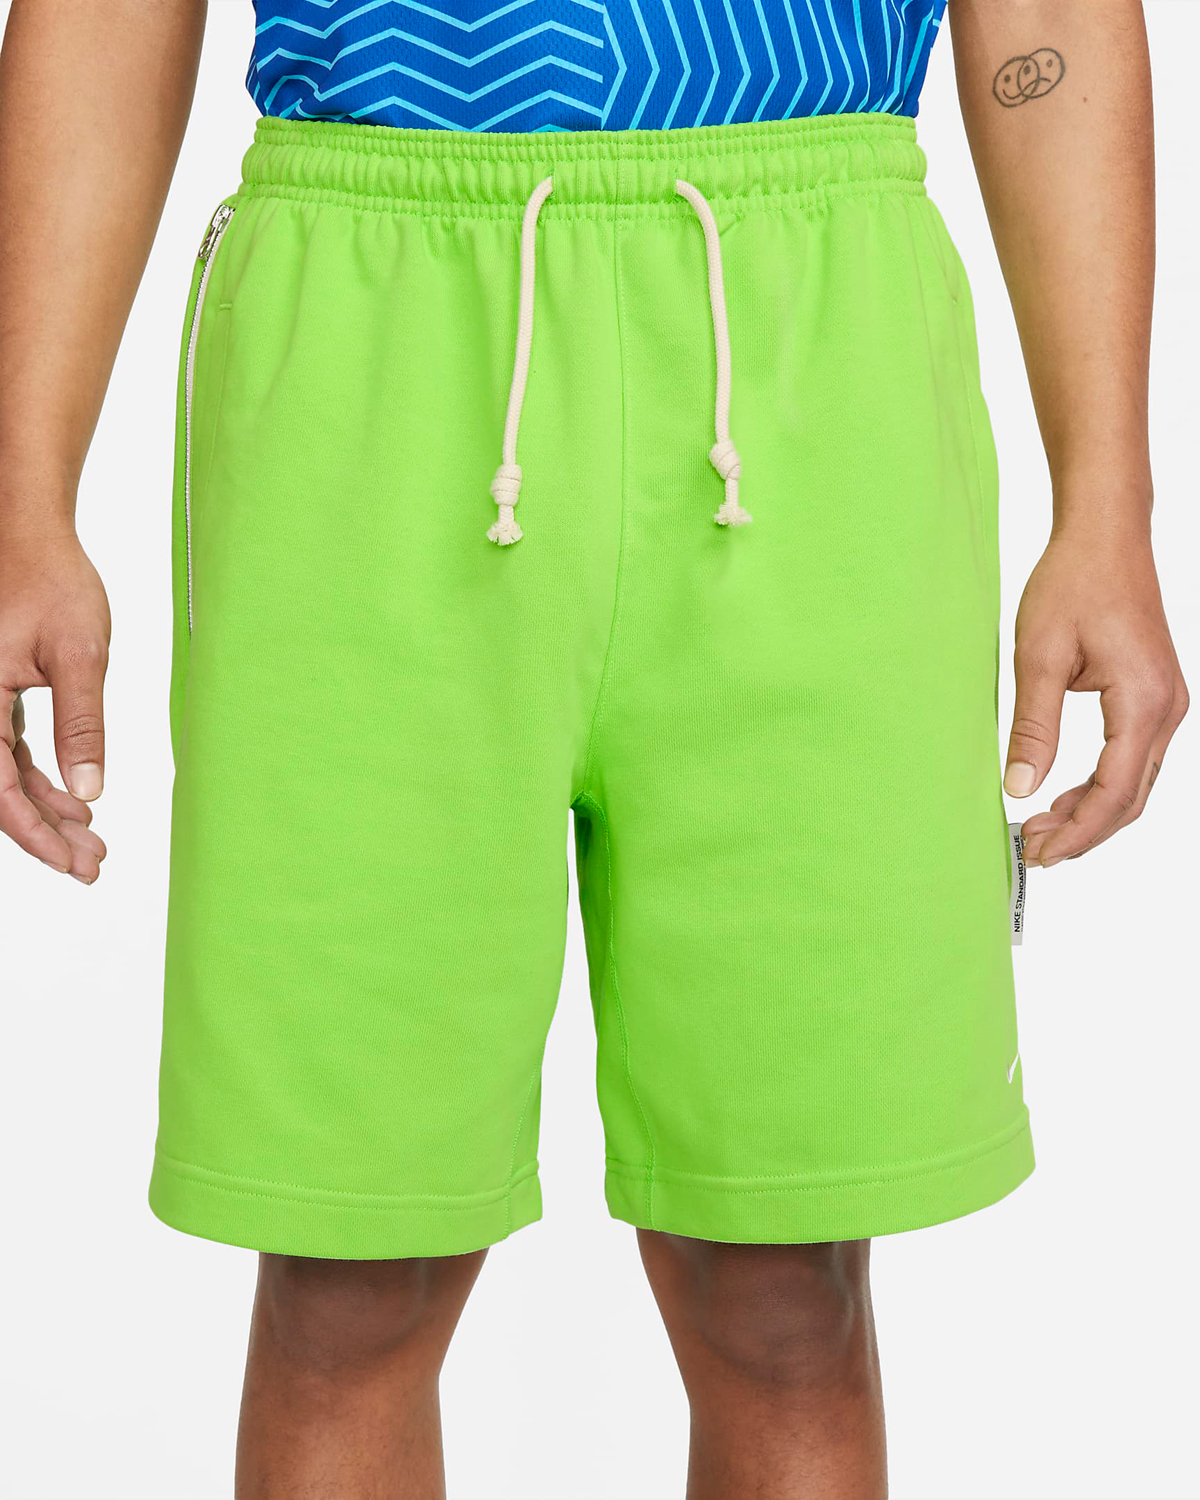 Nike-Standard-Issue-Basketball-Shorts-Action-Green-1